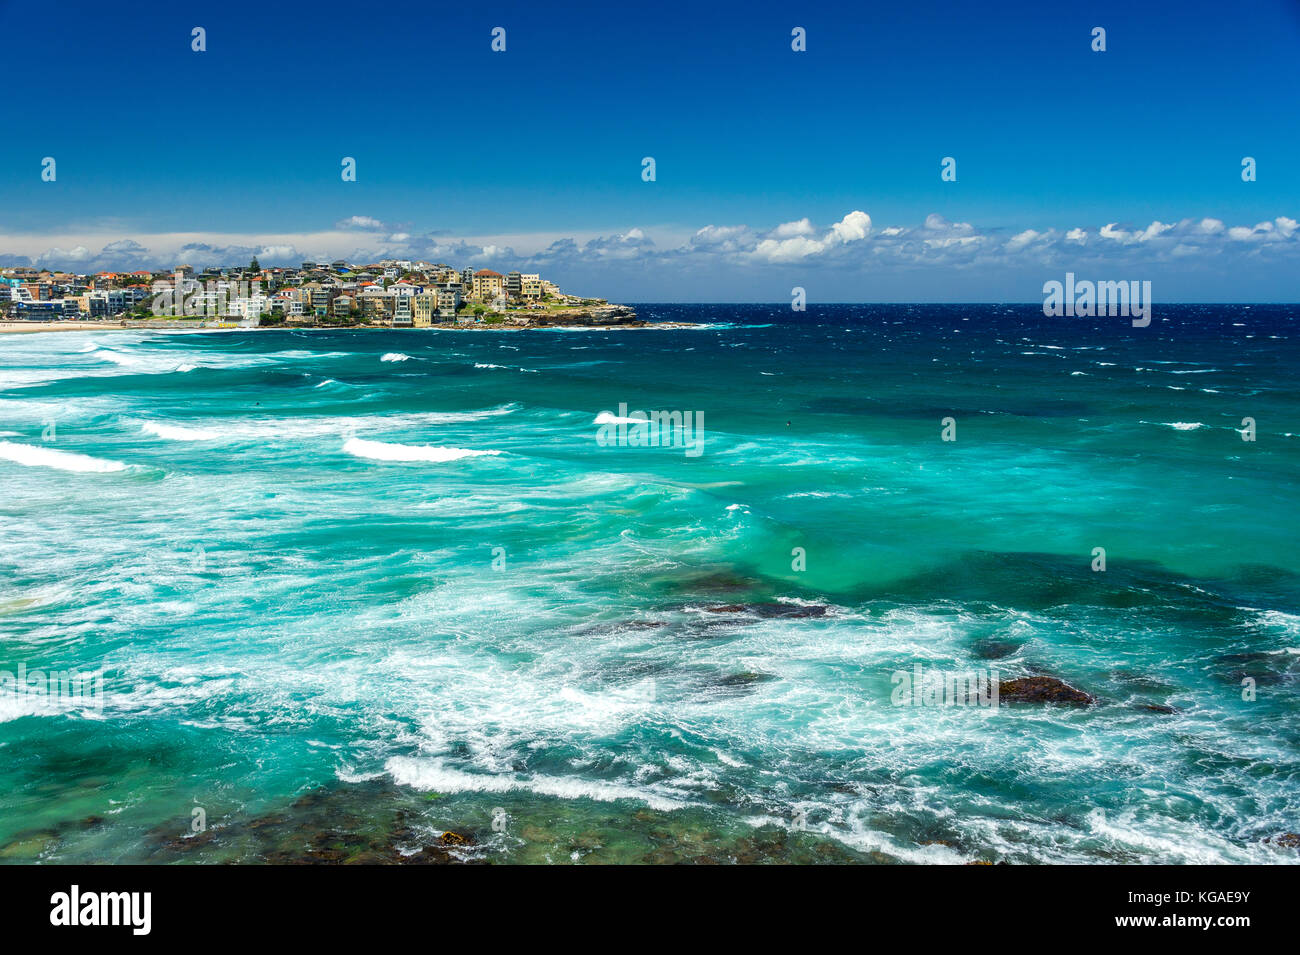 Sydney's famous Bondi Beach in New South Wales, Australia on a stunning summer's day Stock Photo